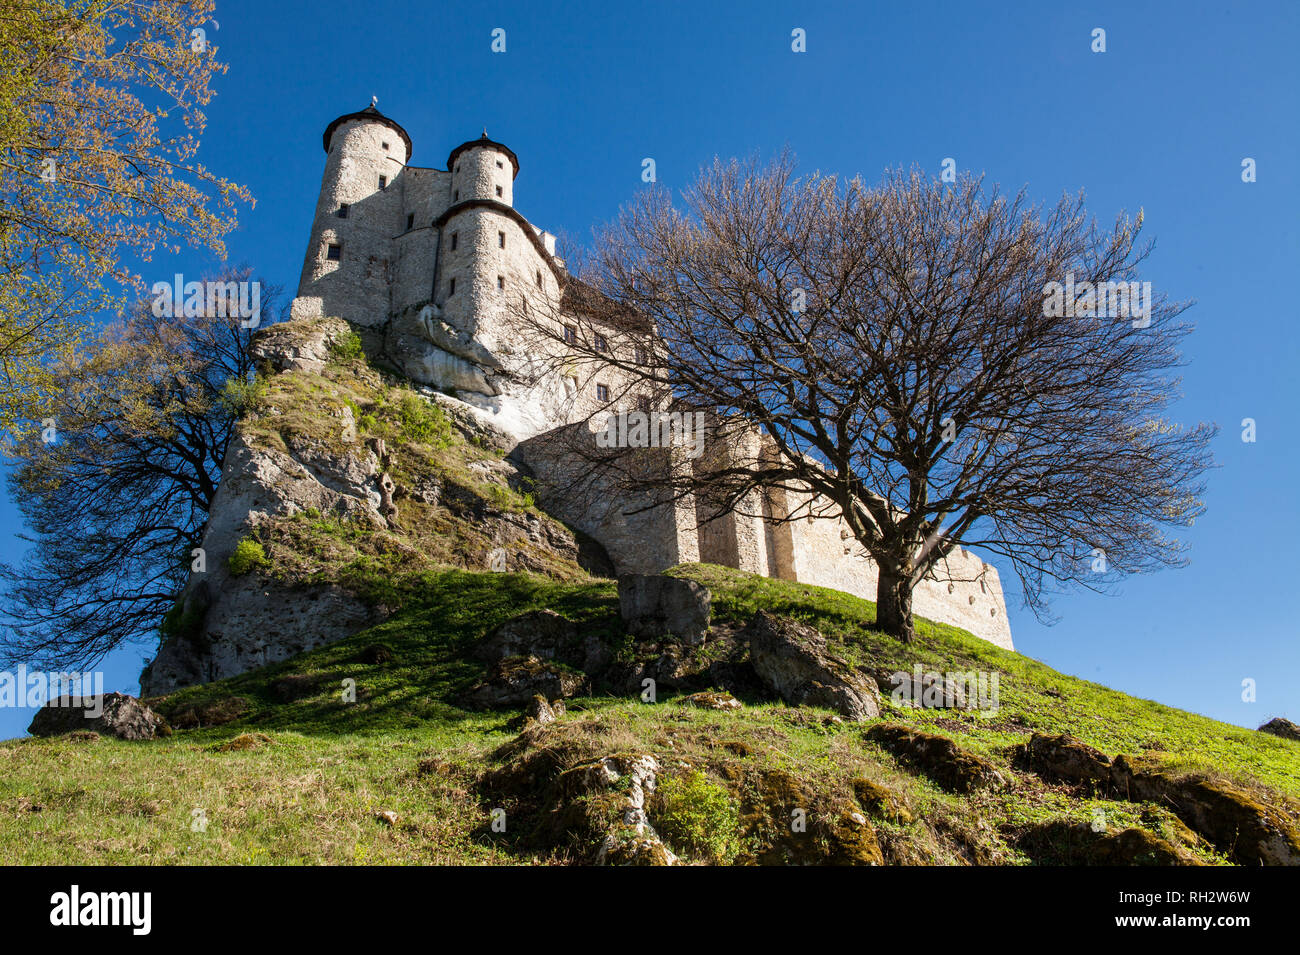 Ruins of a Gothic castle and hotel in Bobolice, Poland. Castle in the village of Bobolice, Jura Krakowsko-Czestochowska. The Trail of the Eagle's Nest Stock Photo